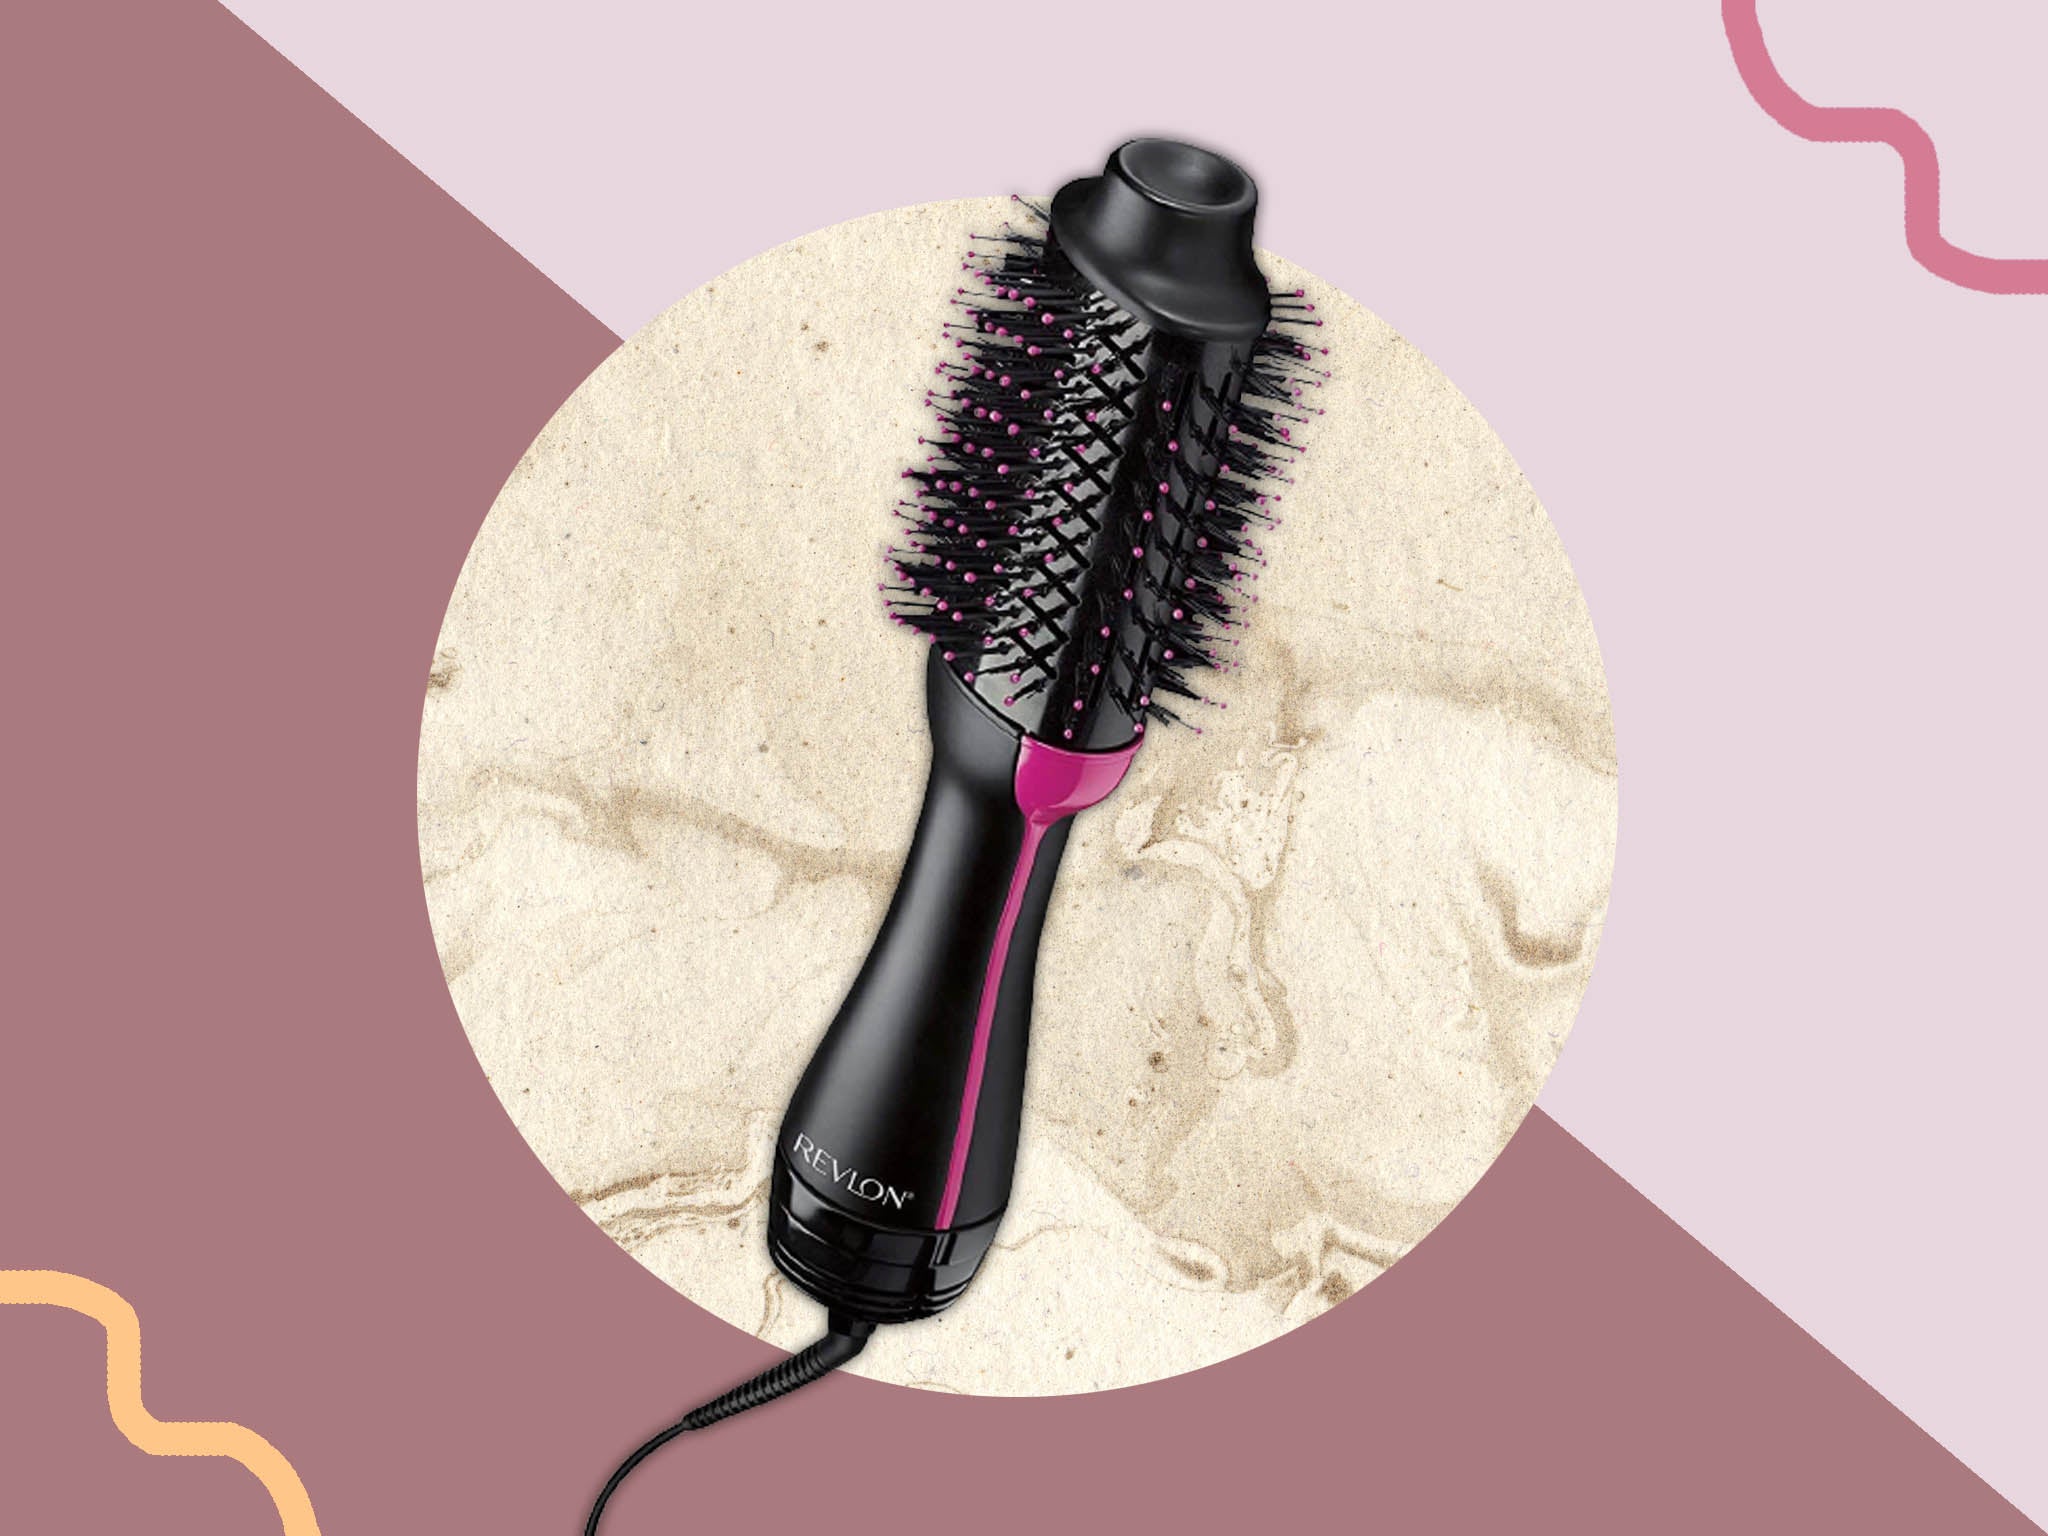 ‘The brush’s power is apparent as soon as you turn it on,’ said our reviewer